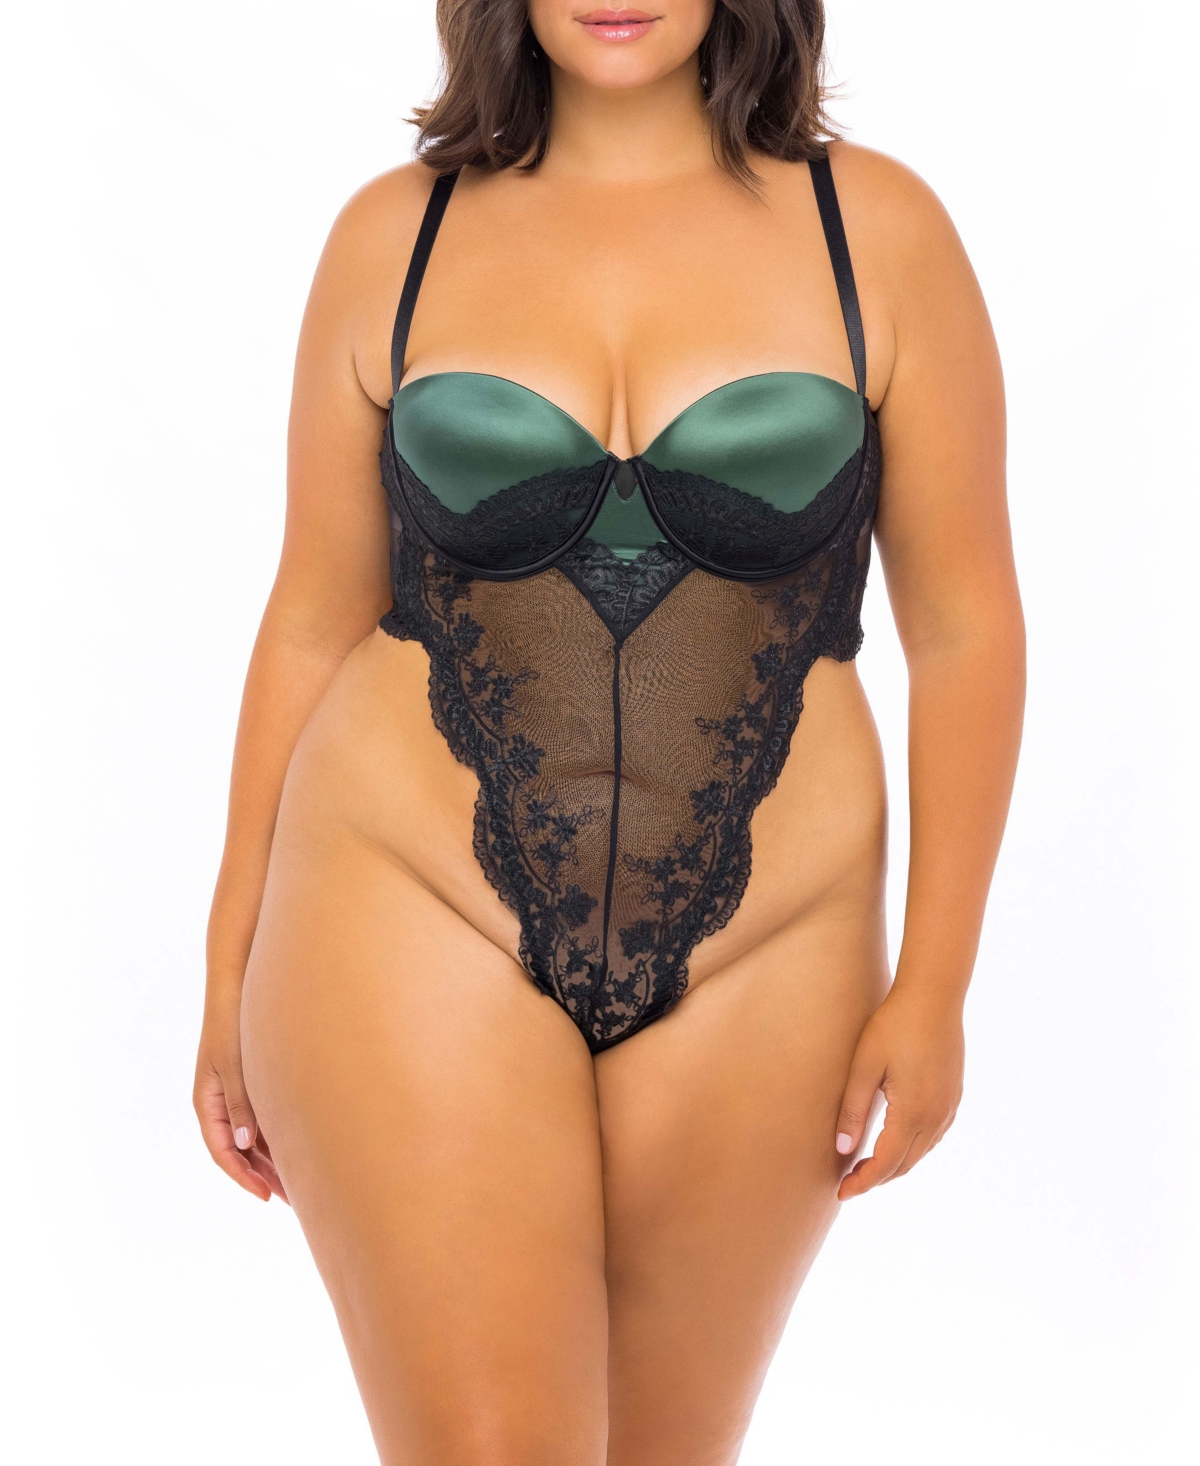 Plus Size Mold Cup High Leg Lingerie Teddy with Embroidery Detailing - Dark Green, Black